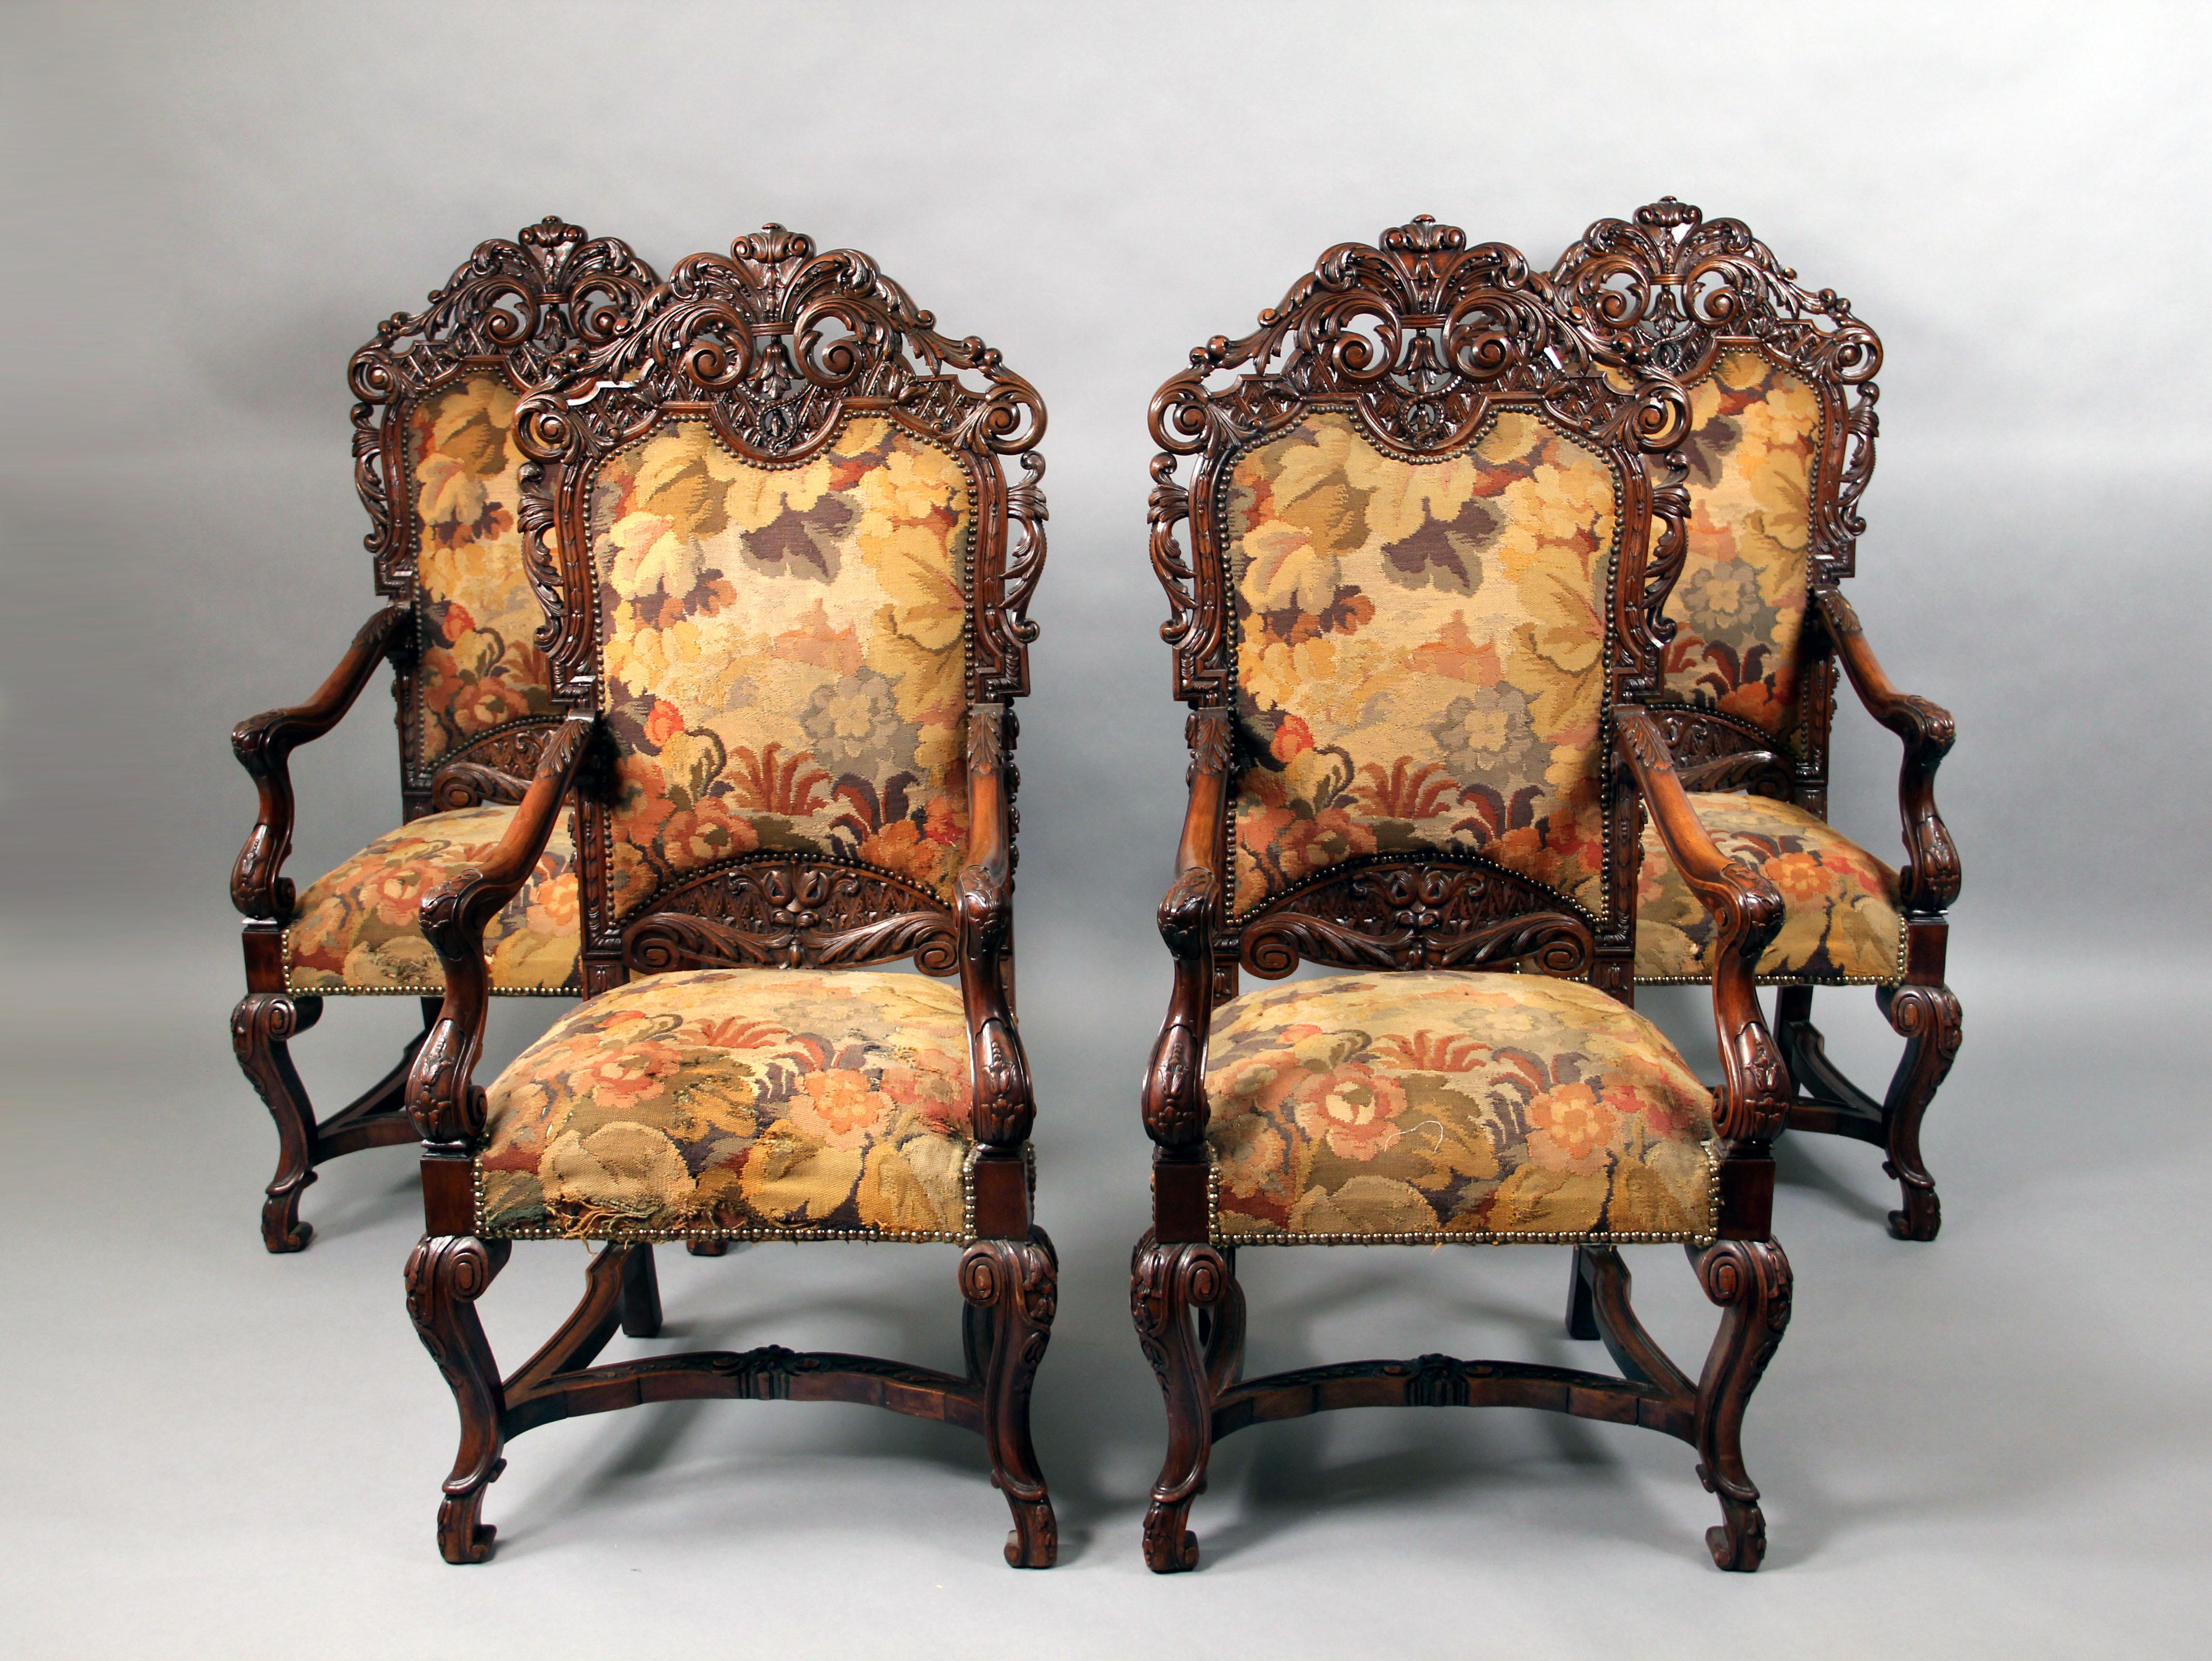 A set of four 19th century large hand-carved wood high back armchairs.

Wonderful quality carvings, standing on curved legs which are attached by a stretcher.